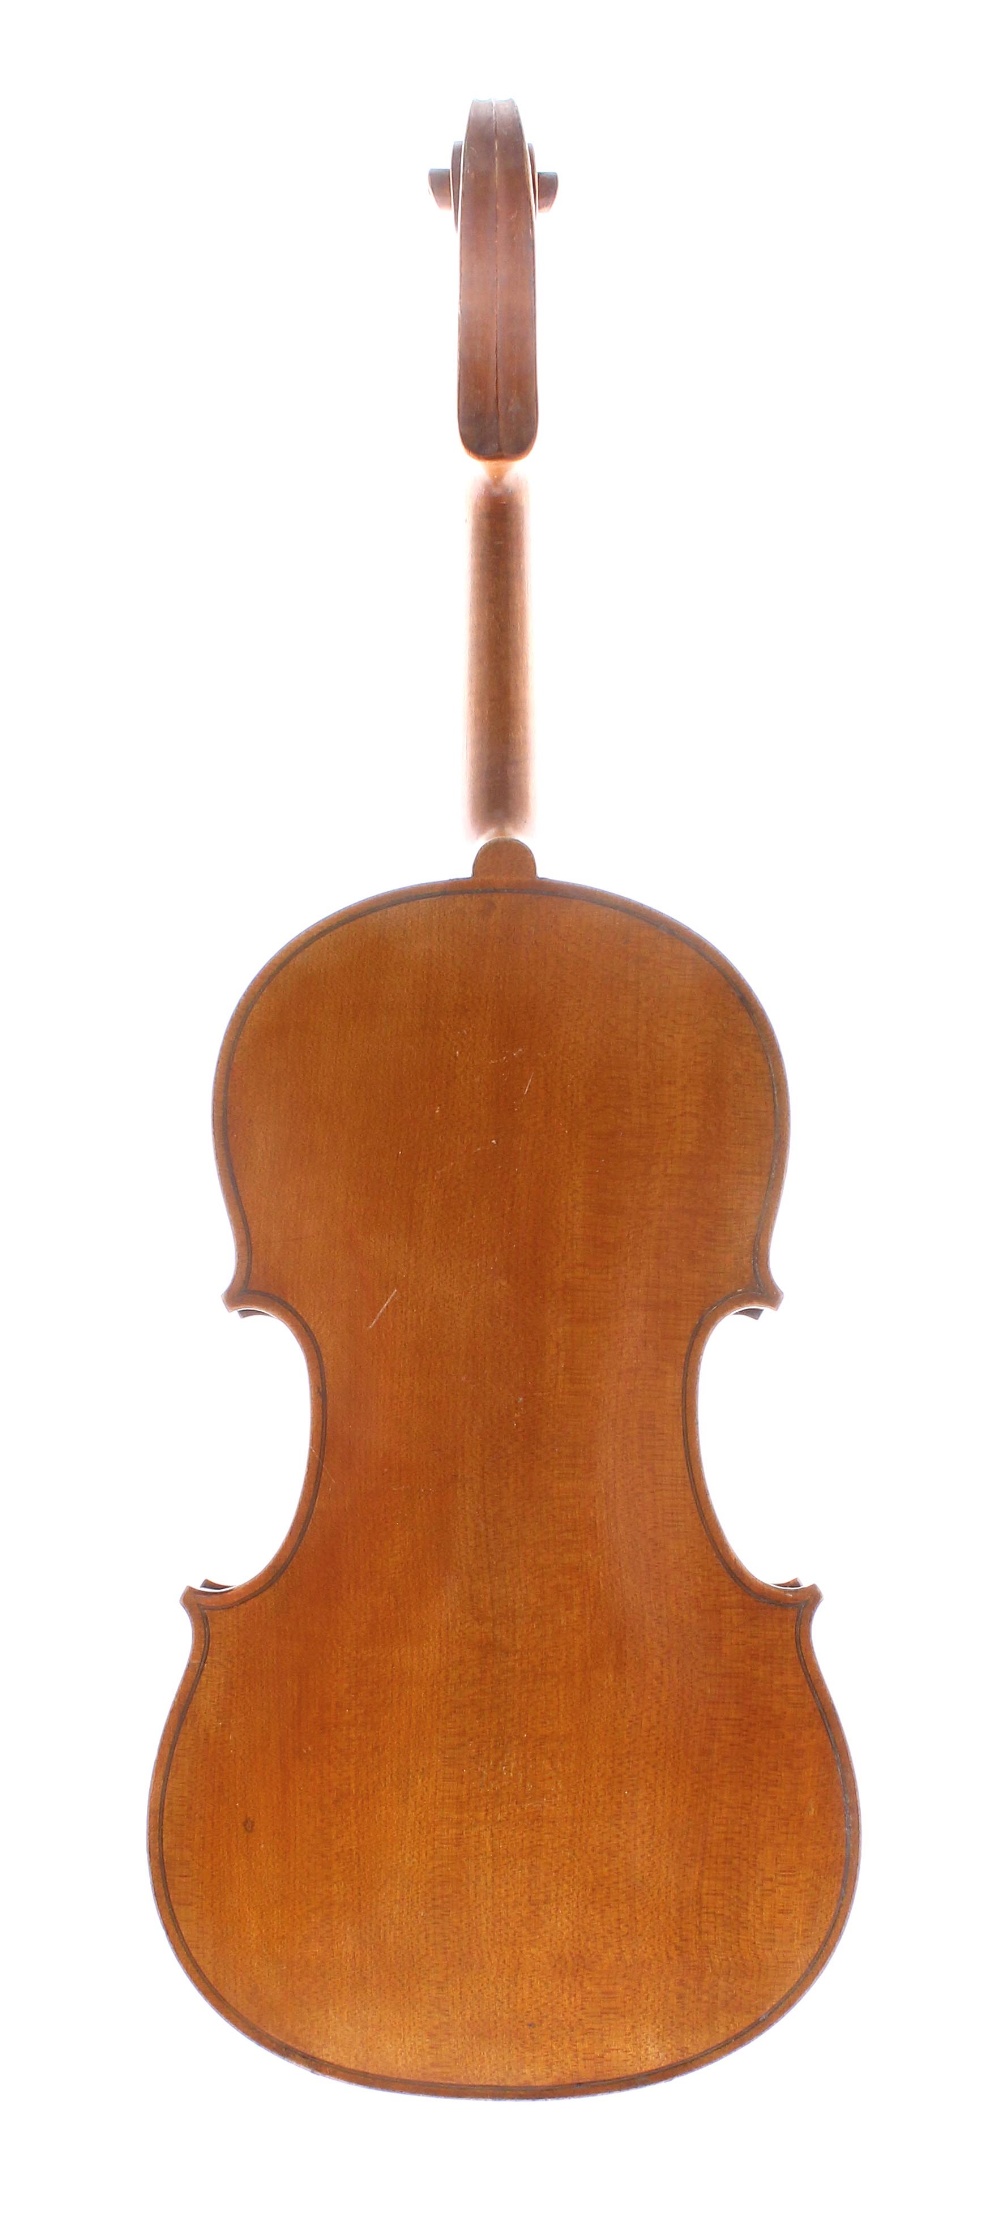 French violin labelled Compagnon, 14 1/8", 35.90cm - Image 2 of 2